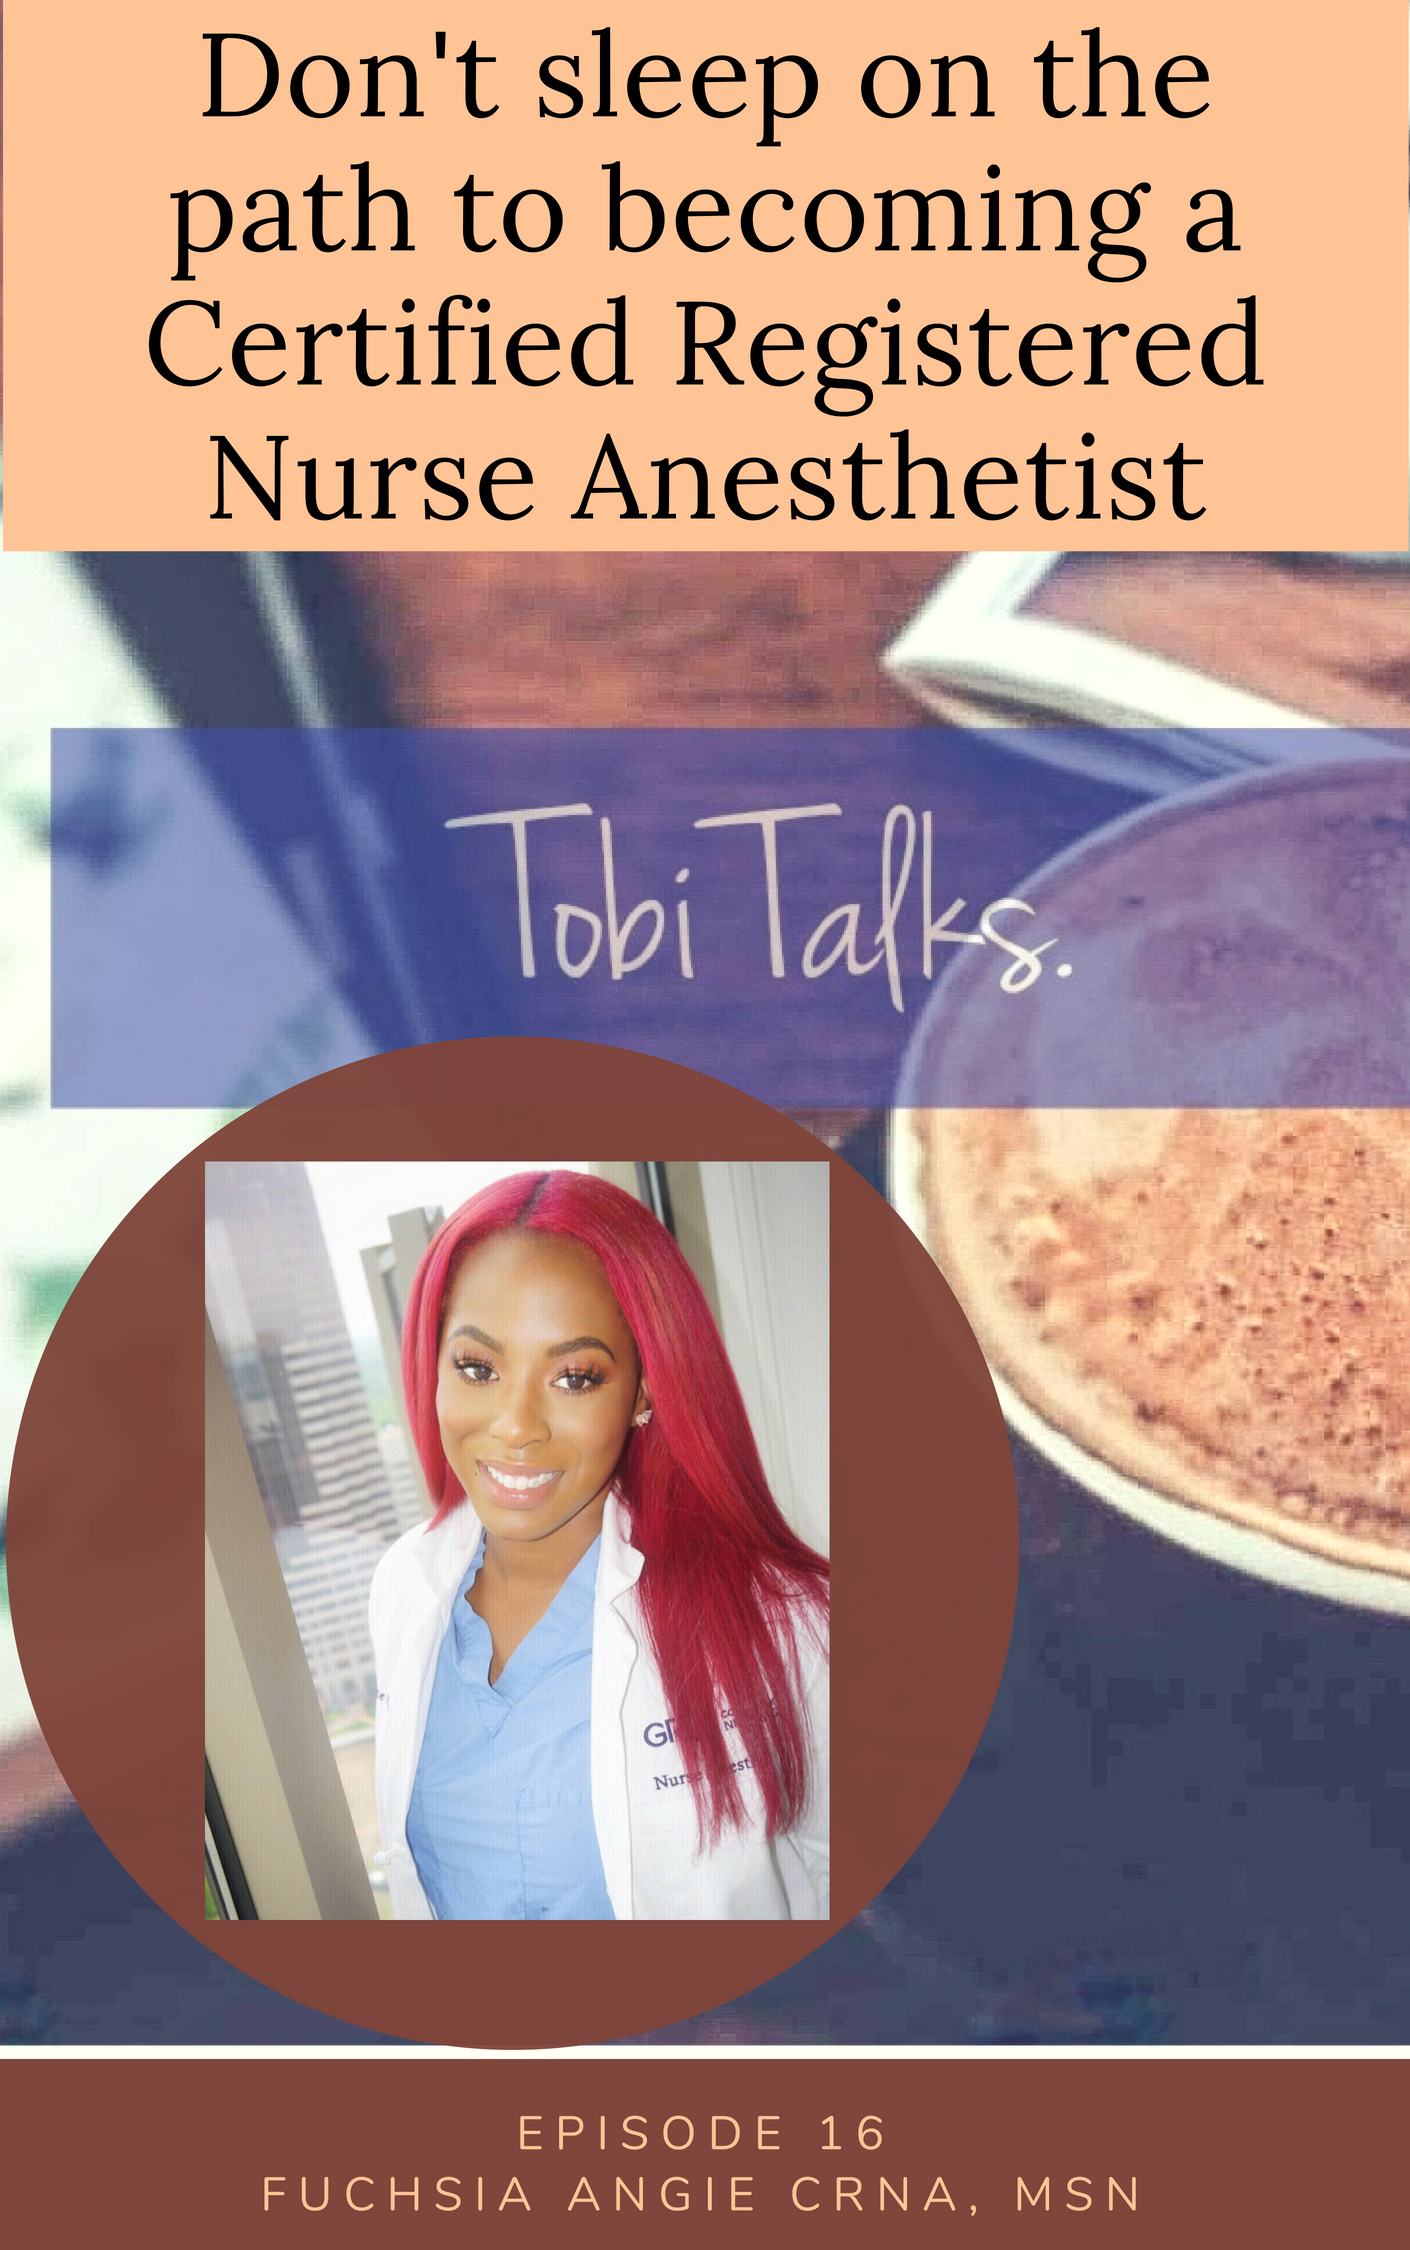 Don’t sleep on the path to becoming a Certified Registered Nurse Anesthetist